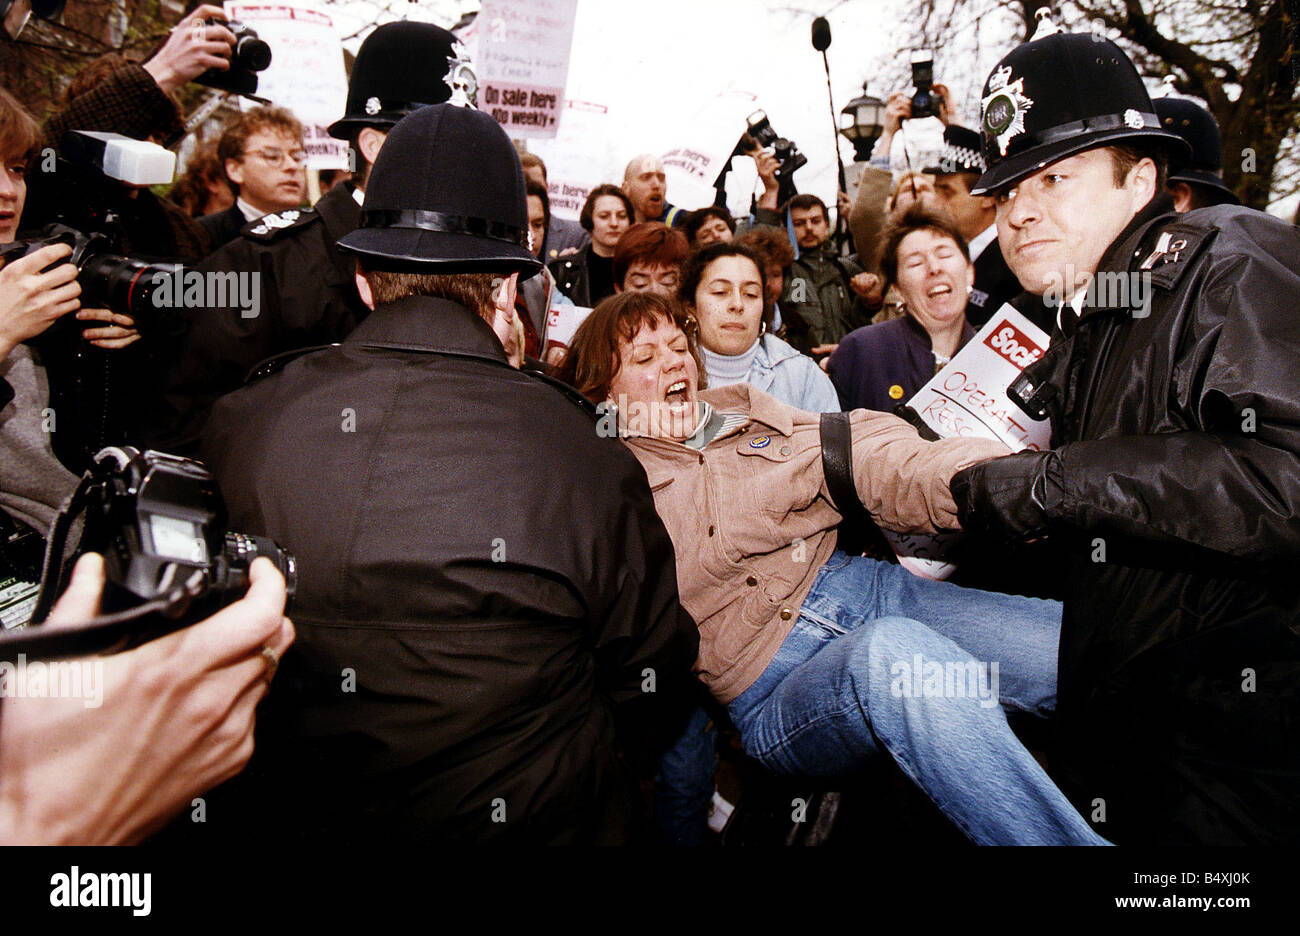 Pro and anti abortion campaigners clash in London Stock Photo